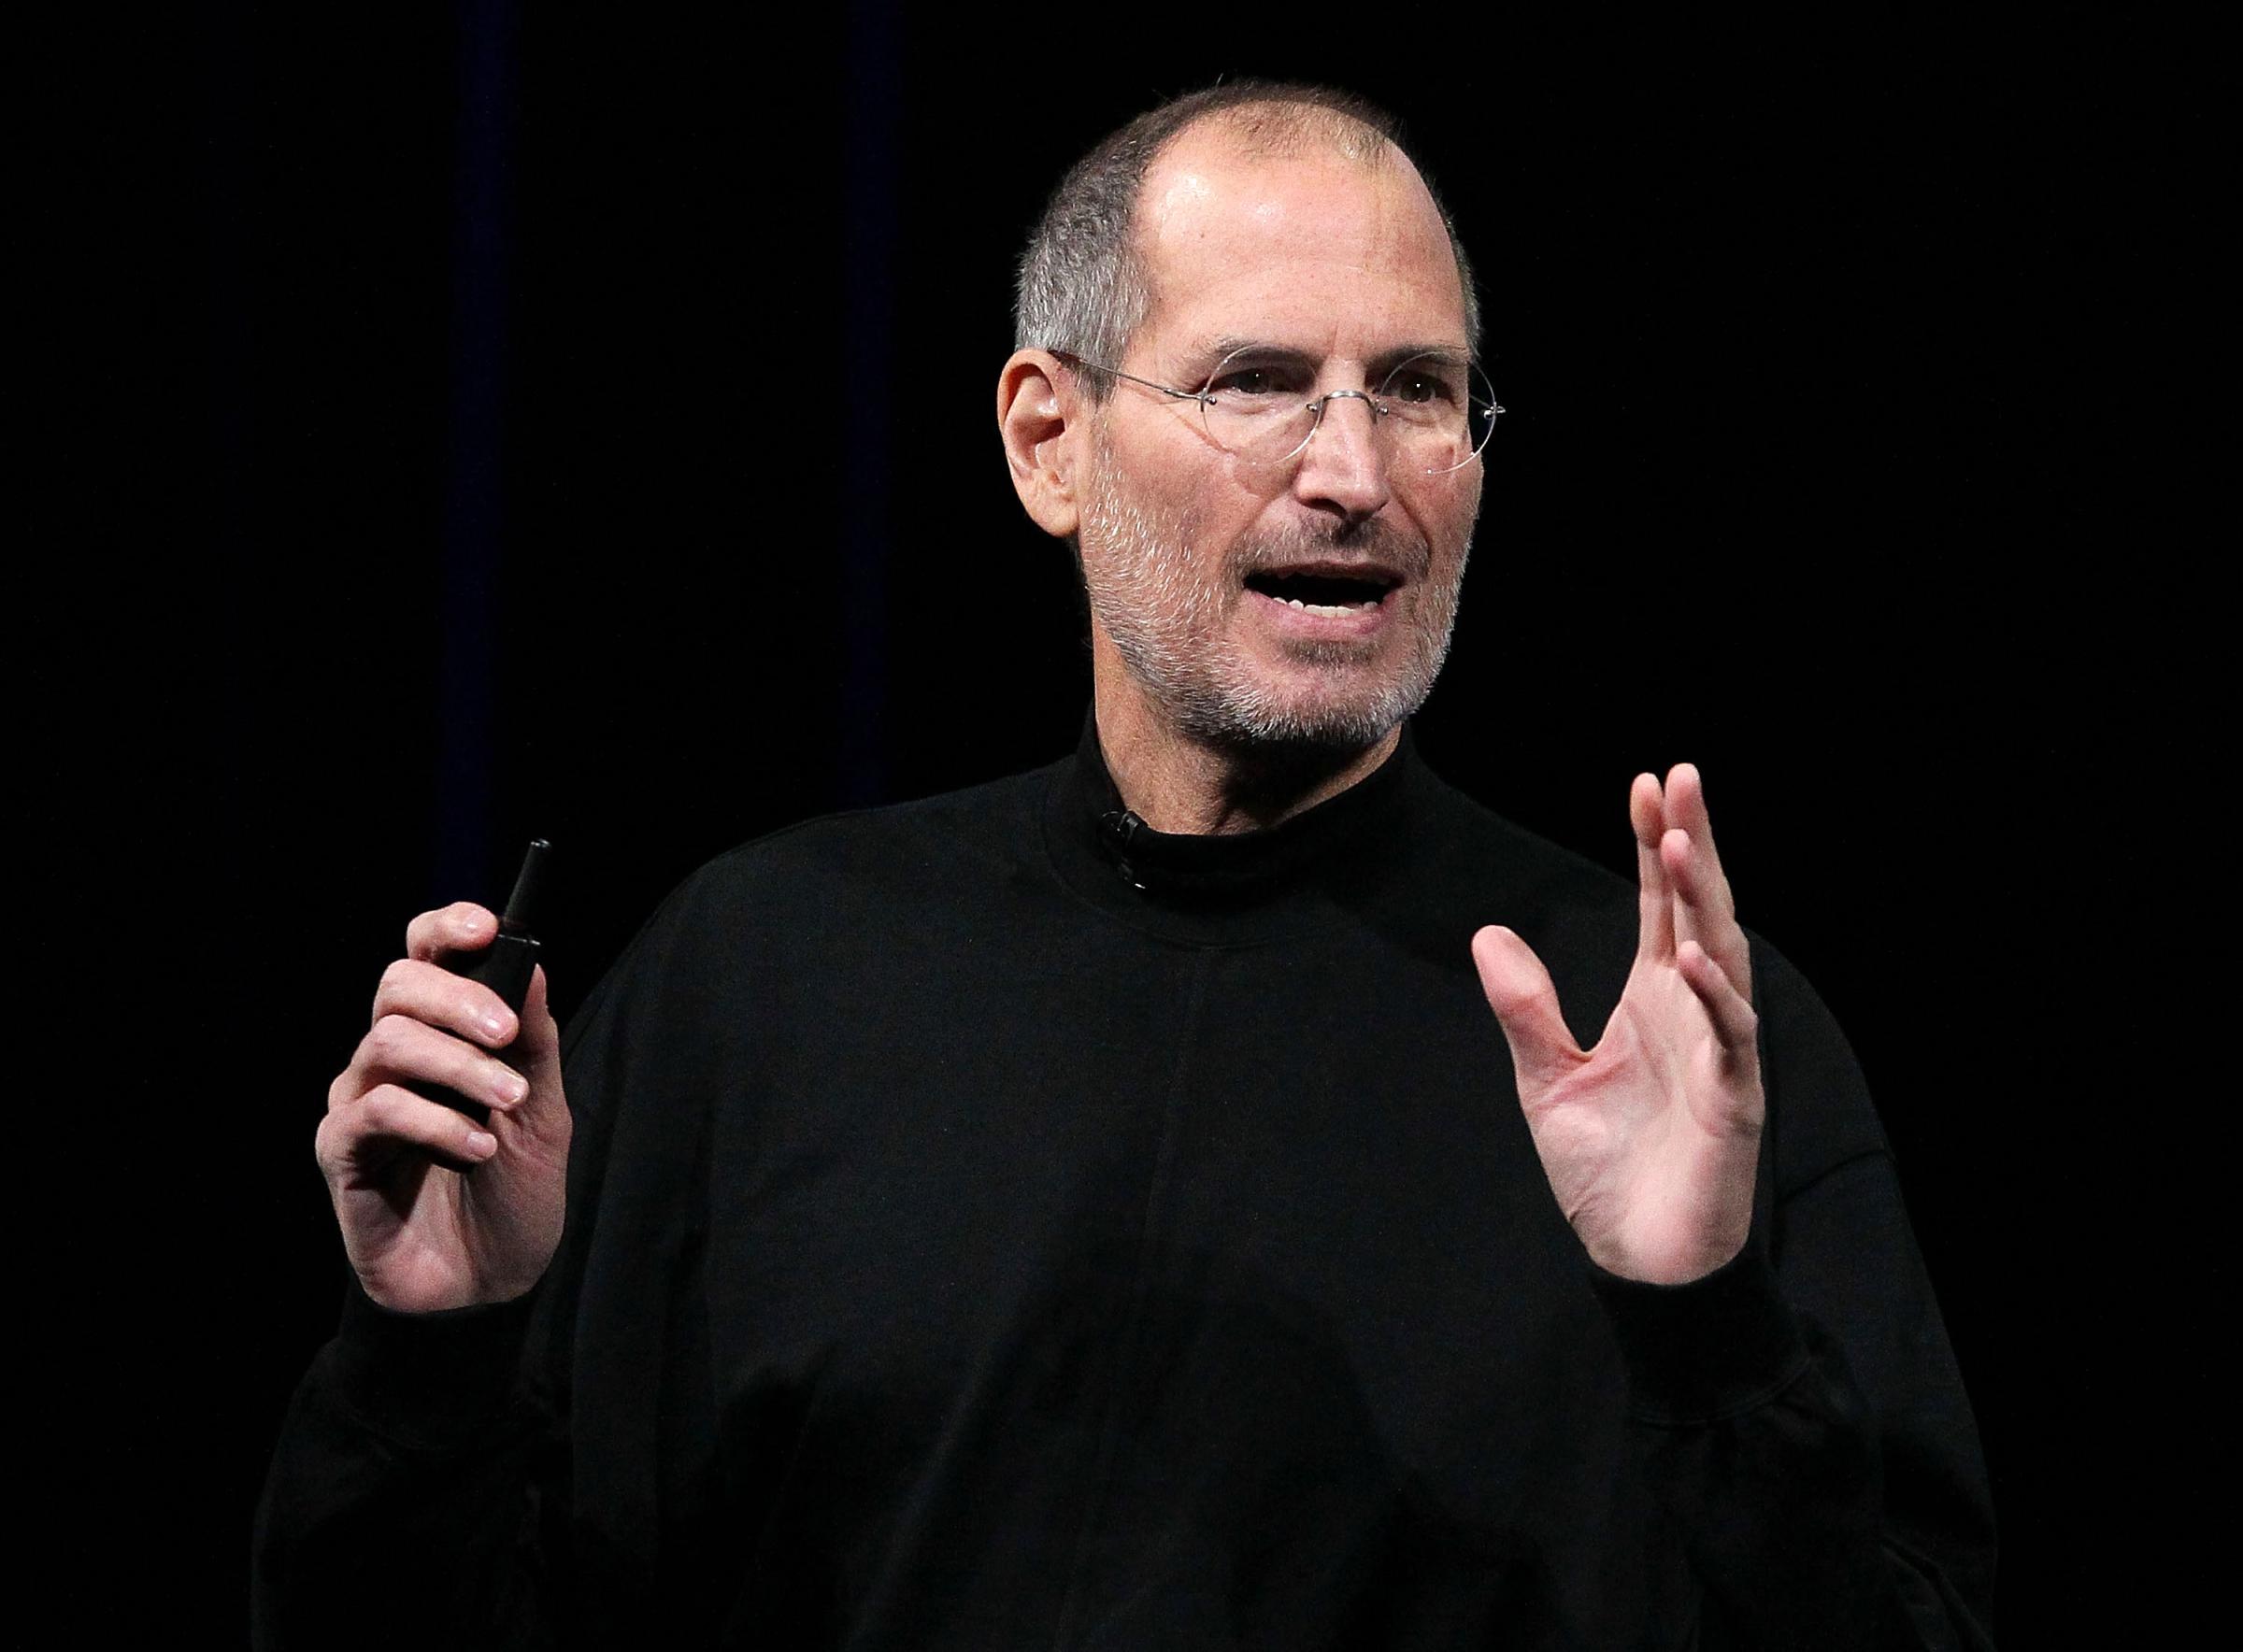 Steve Jobs at an Apple Special Event in San Francisco on Jan. 27, 2010.